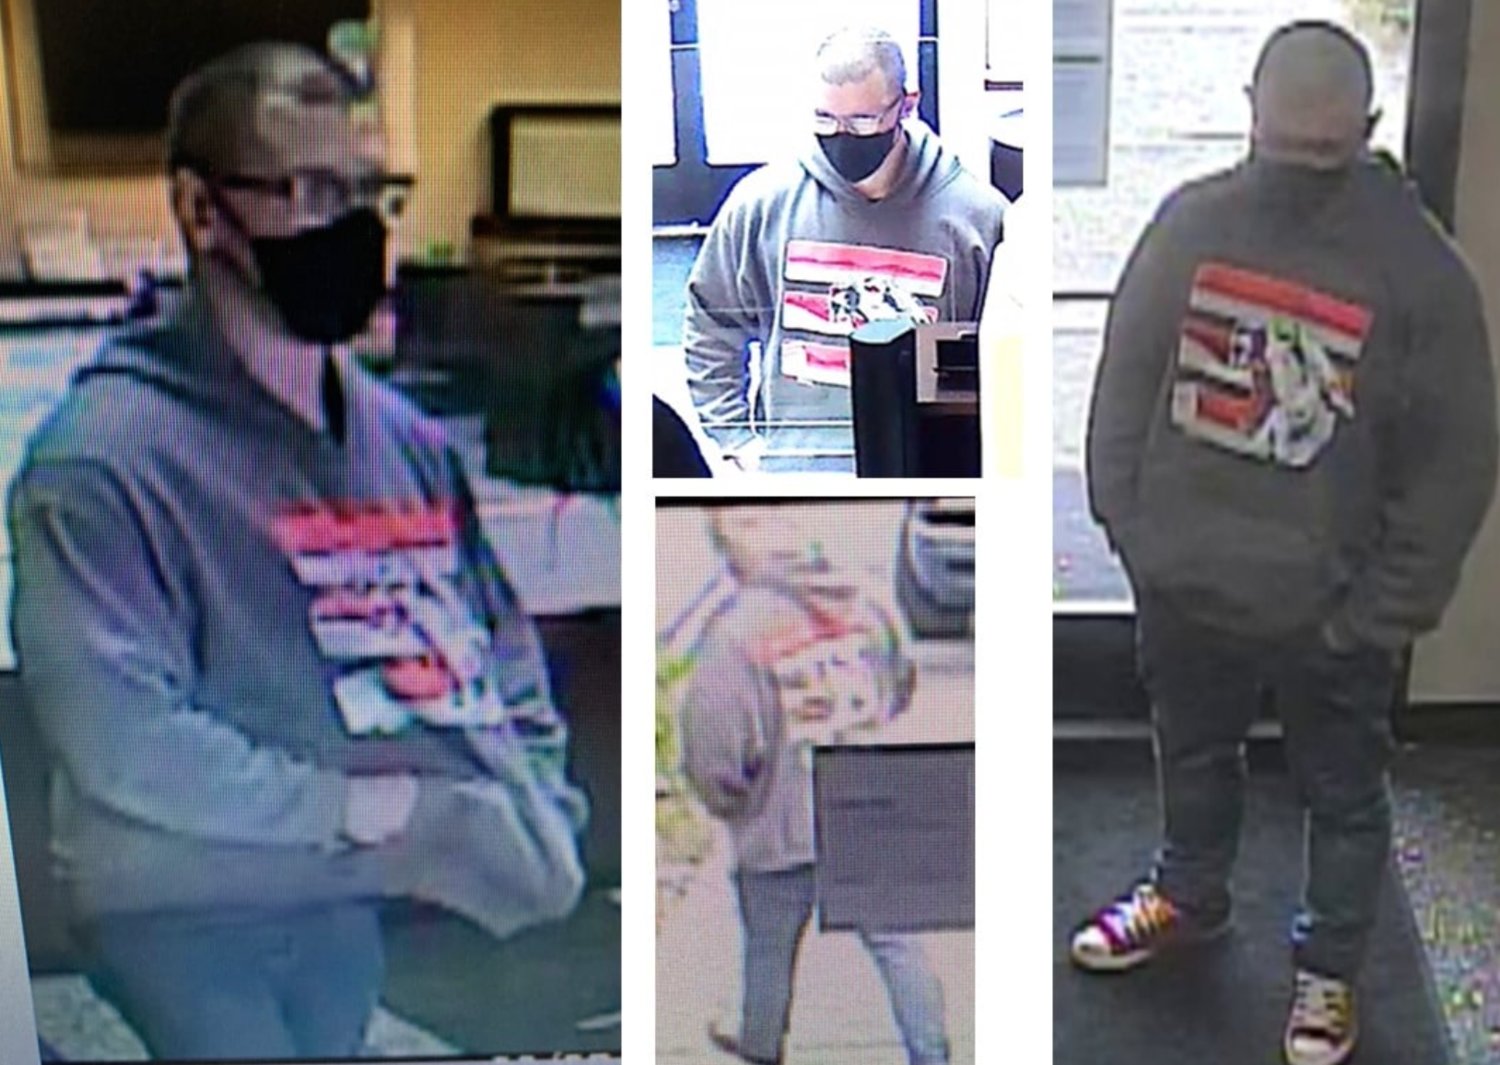 The robbery suspect is pictured in these images provided by the Thurston County Sheriff’s Office.